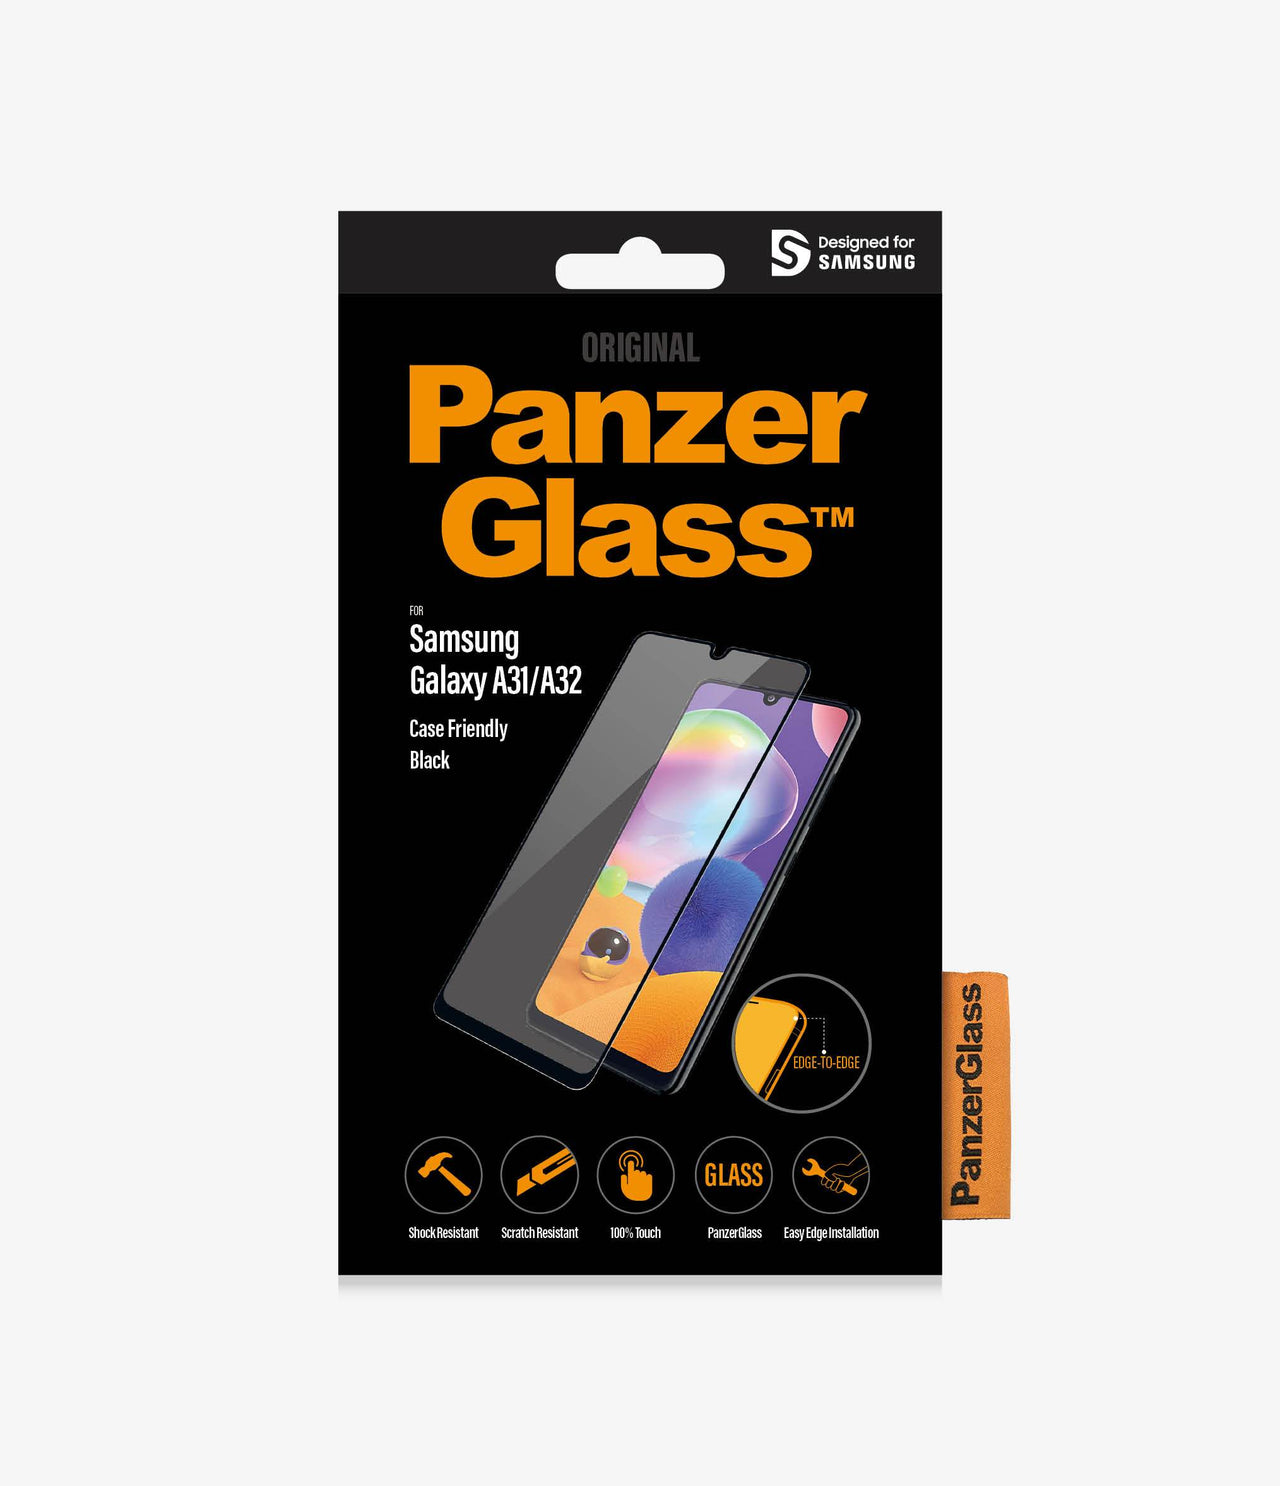 Panzer Glass Screen Protector for Samsung Galaxy A31/A32 4G - Black